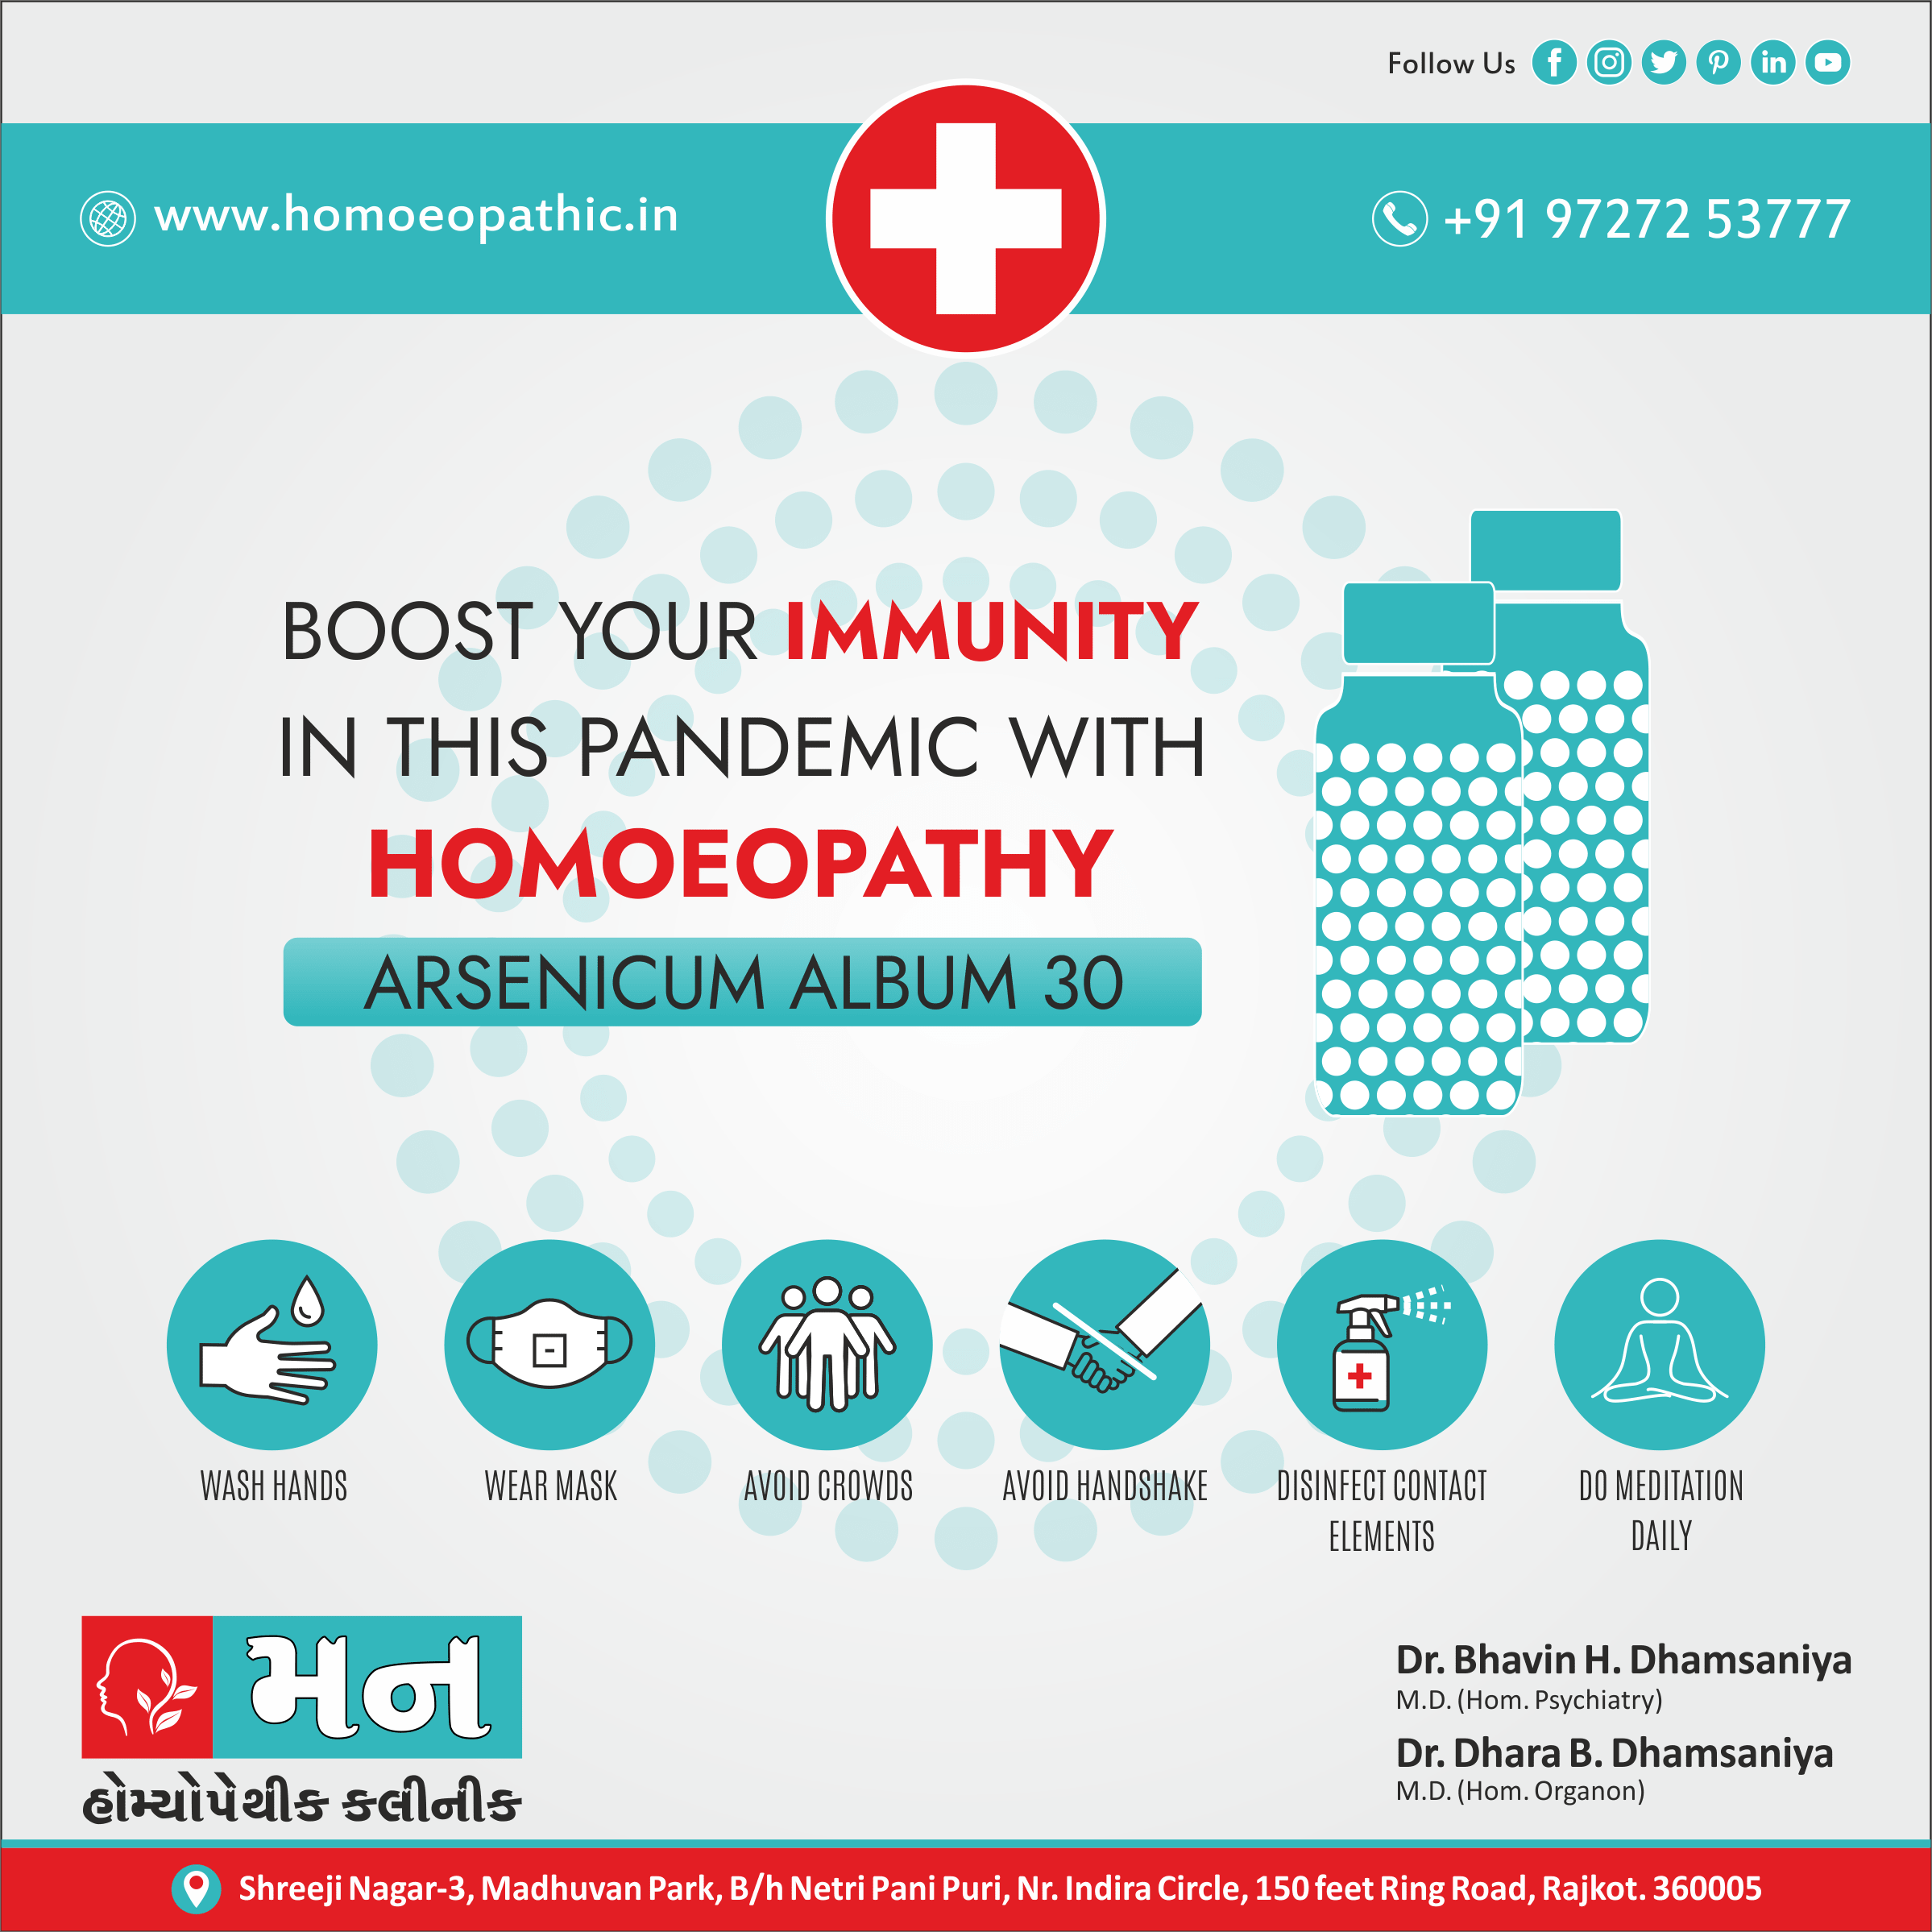 Boost Your Immunity with Homeopathy Arsenicum album 30 against Covid19 Mann Homeopathic Clinic Rajkot